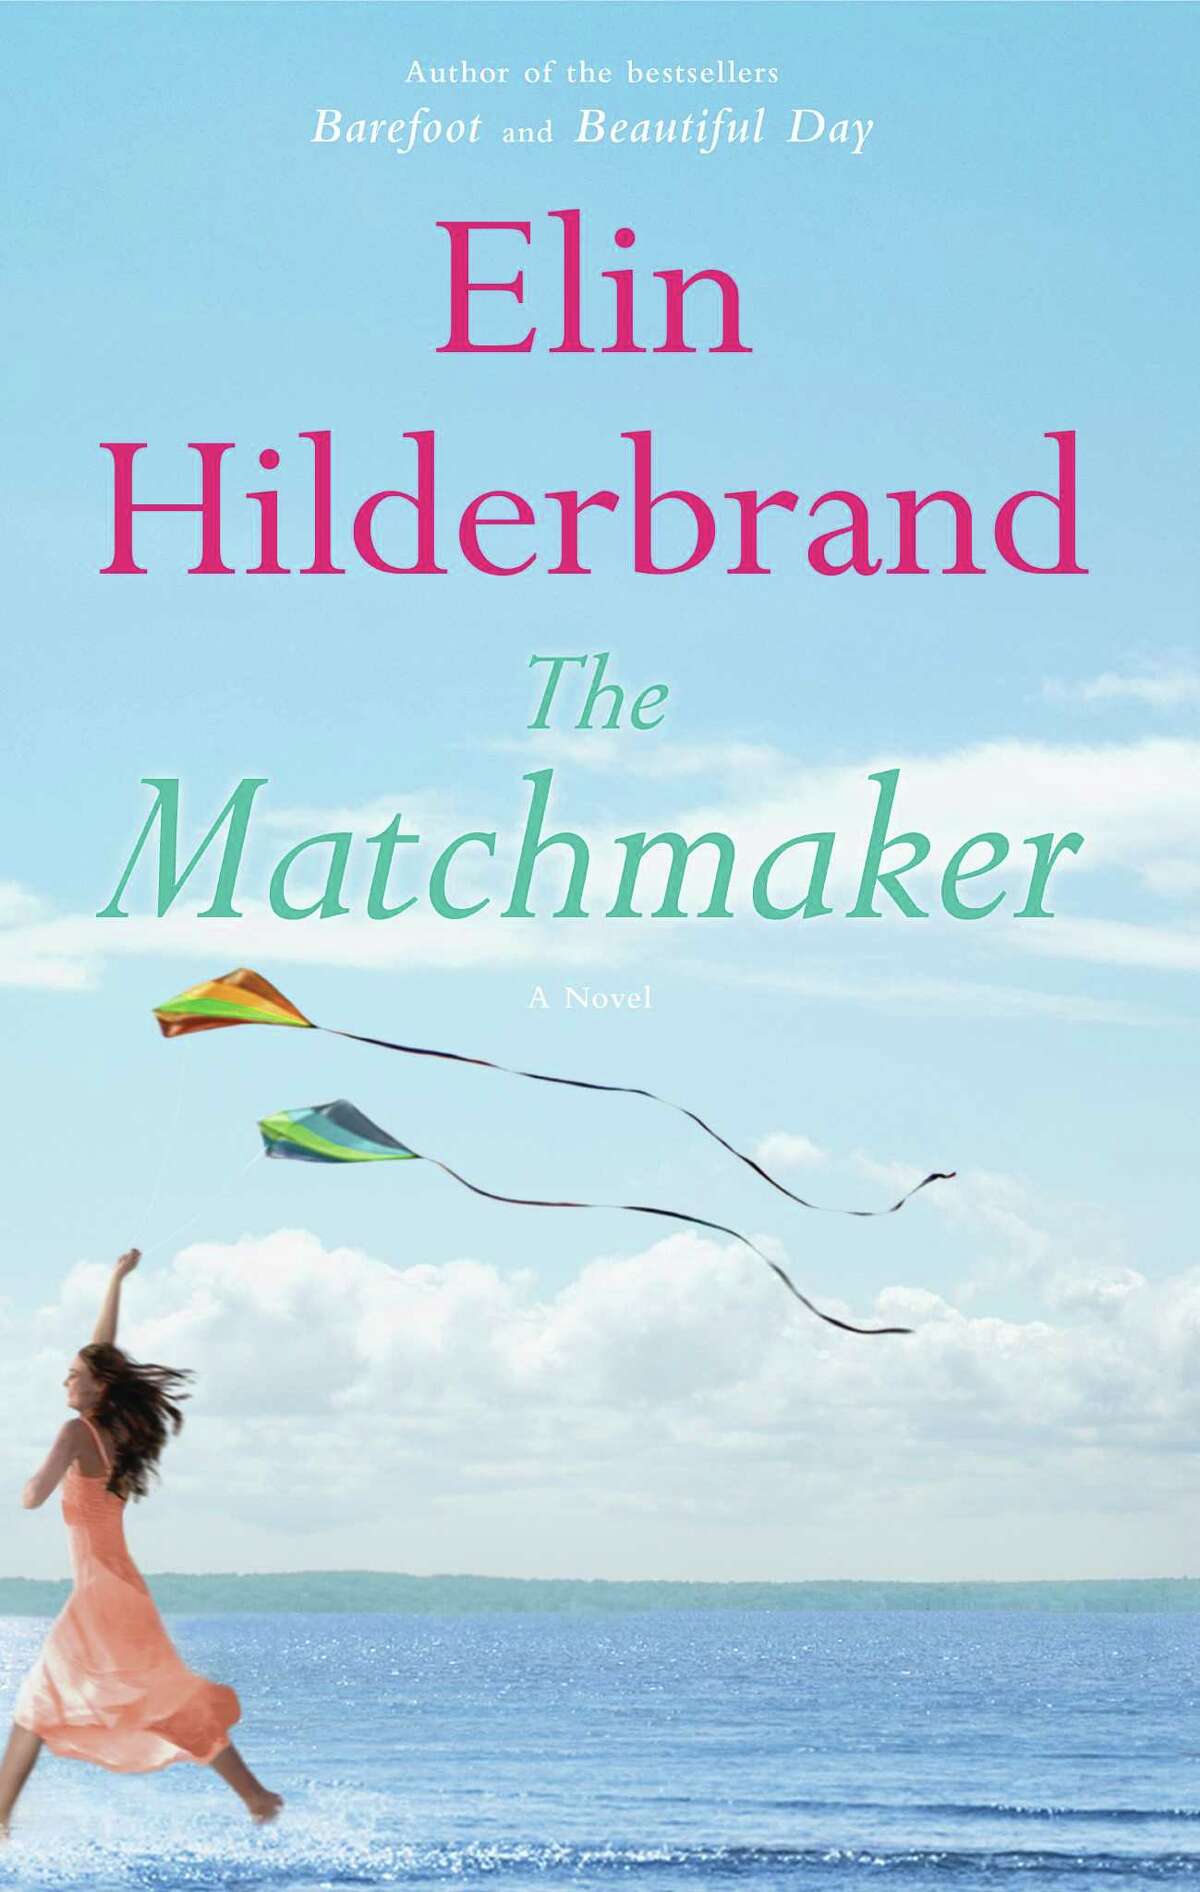 Best-selling author Elin Hilderbrand will kick off the Darien Library's adult summer reading program at 7 p.m. Thursday, June 12, when she will discuss her newest book, "The Matchmaker."